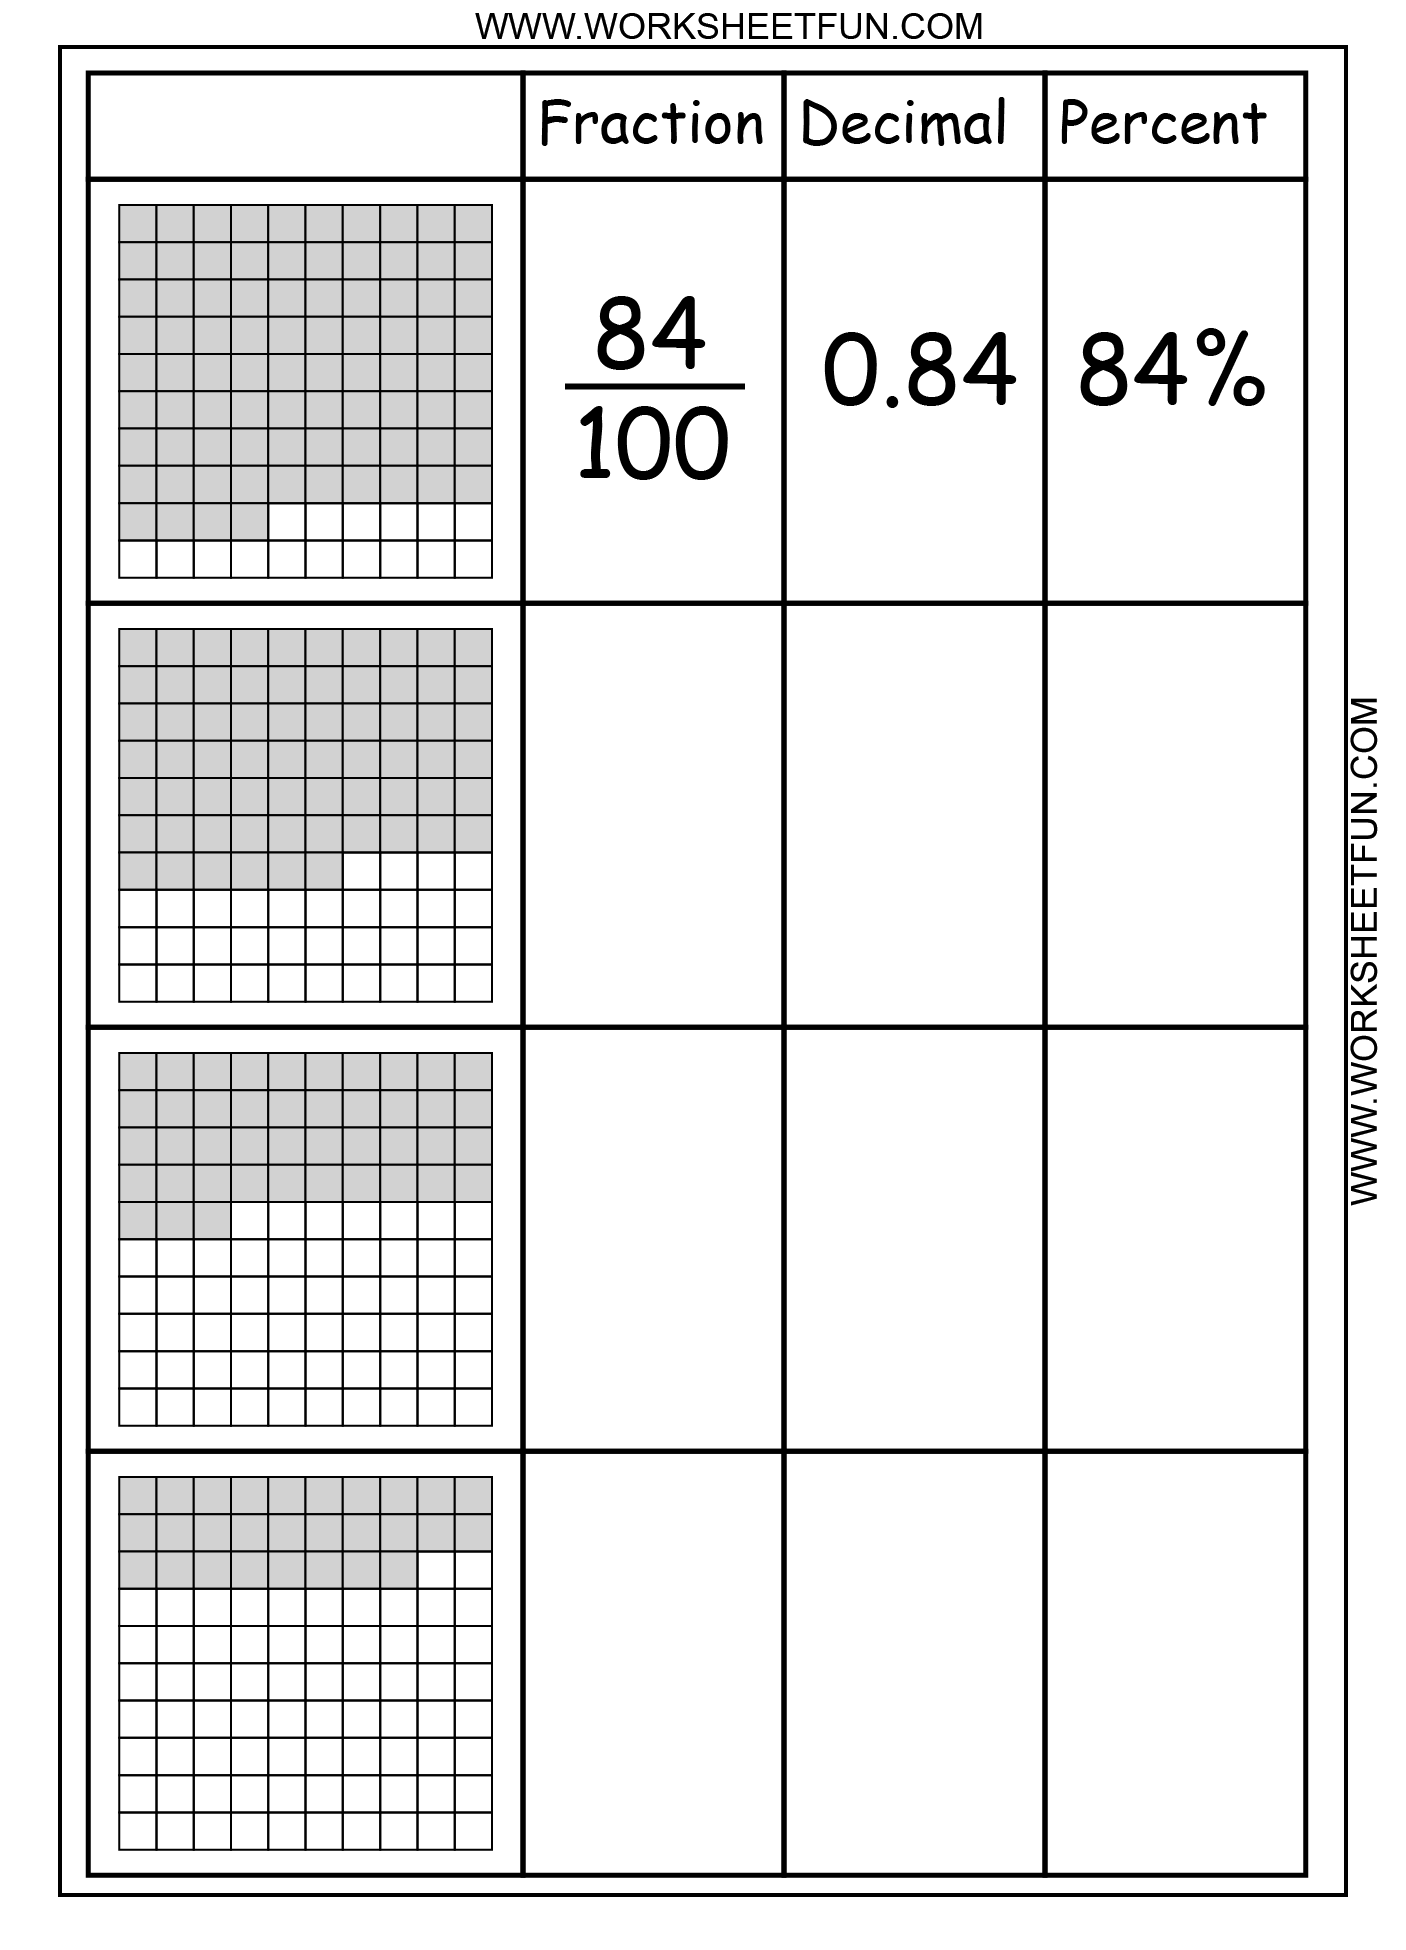 basic fractions to percentages